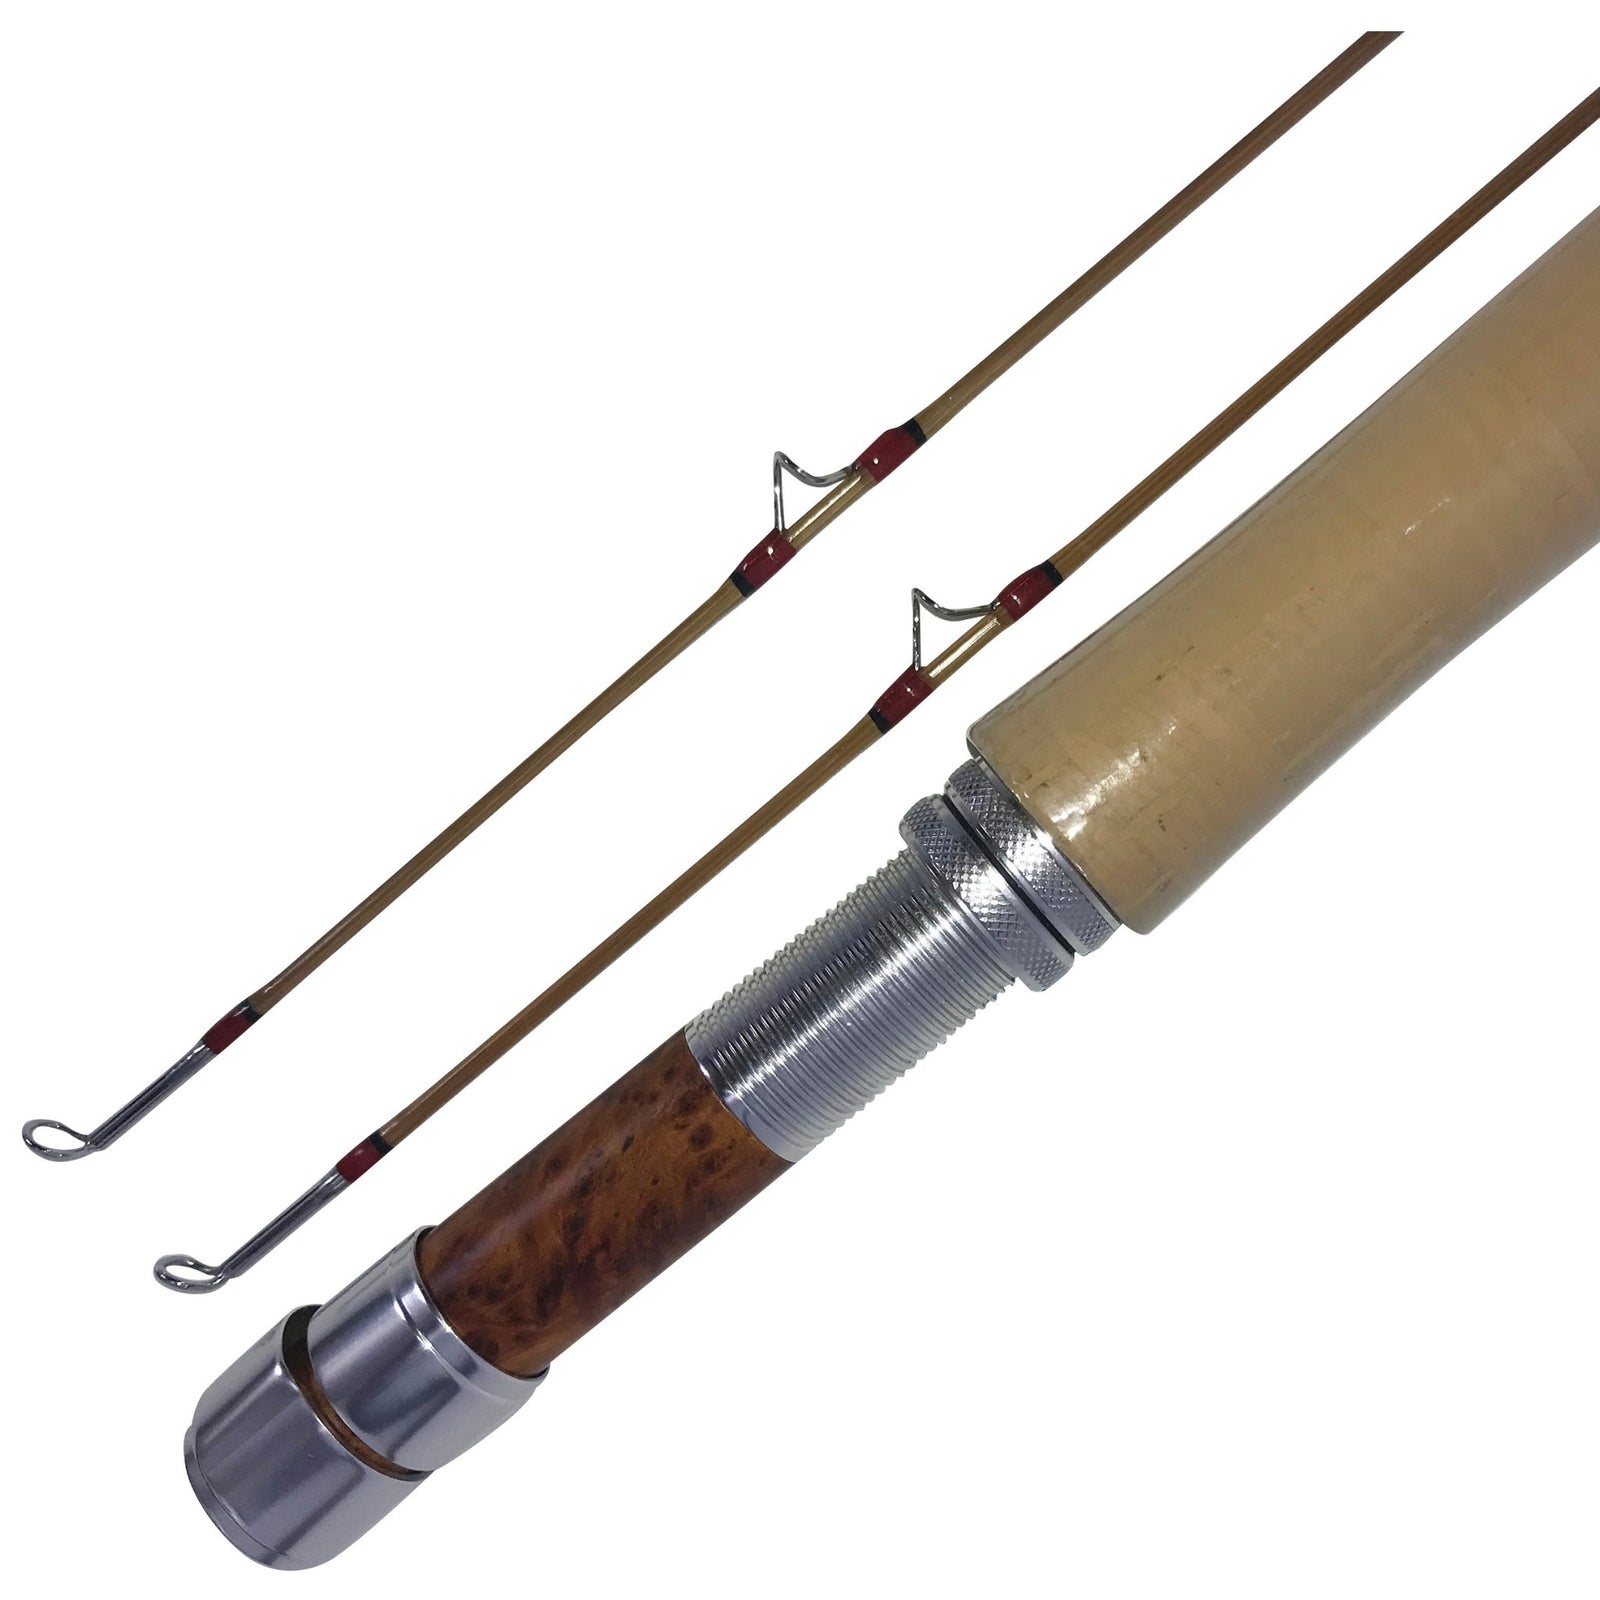 All-Around Bamboo Fly Rods - Headwaters Bamboo